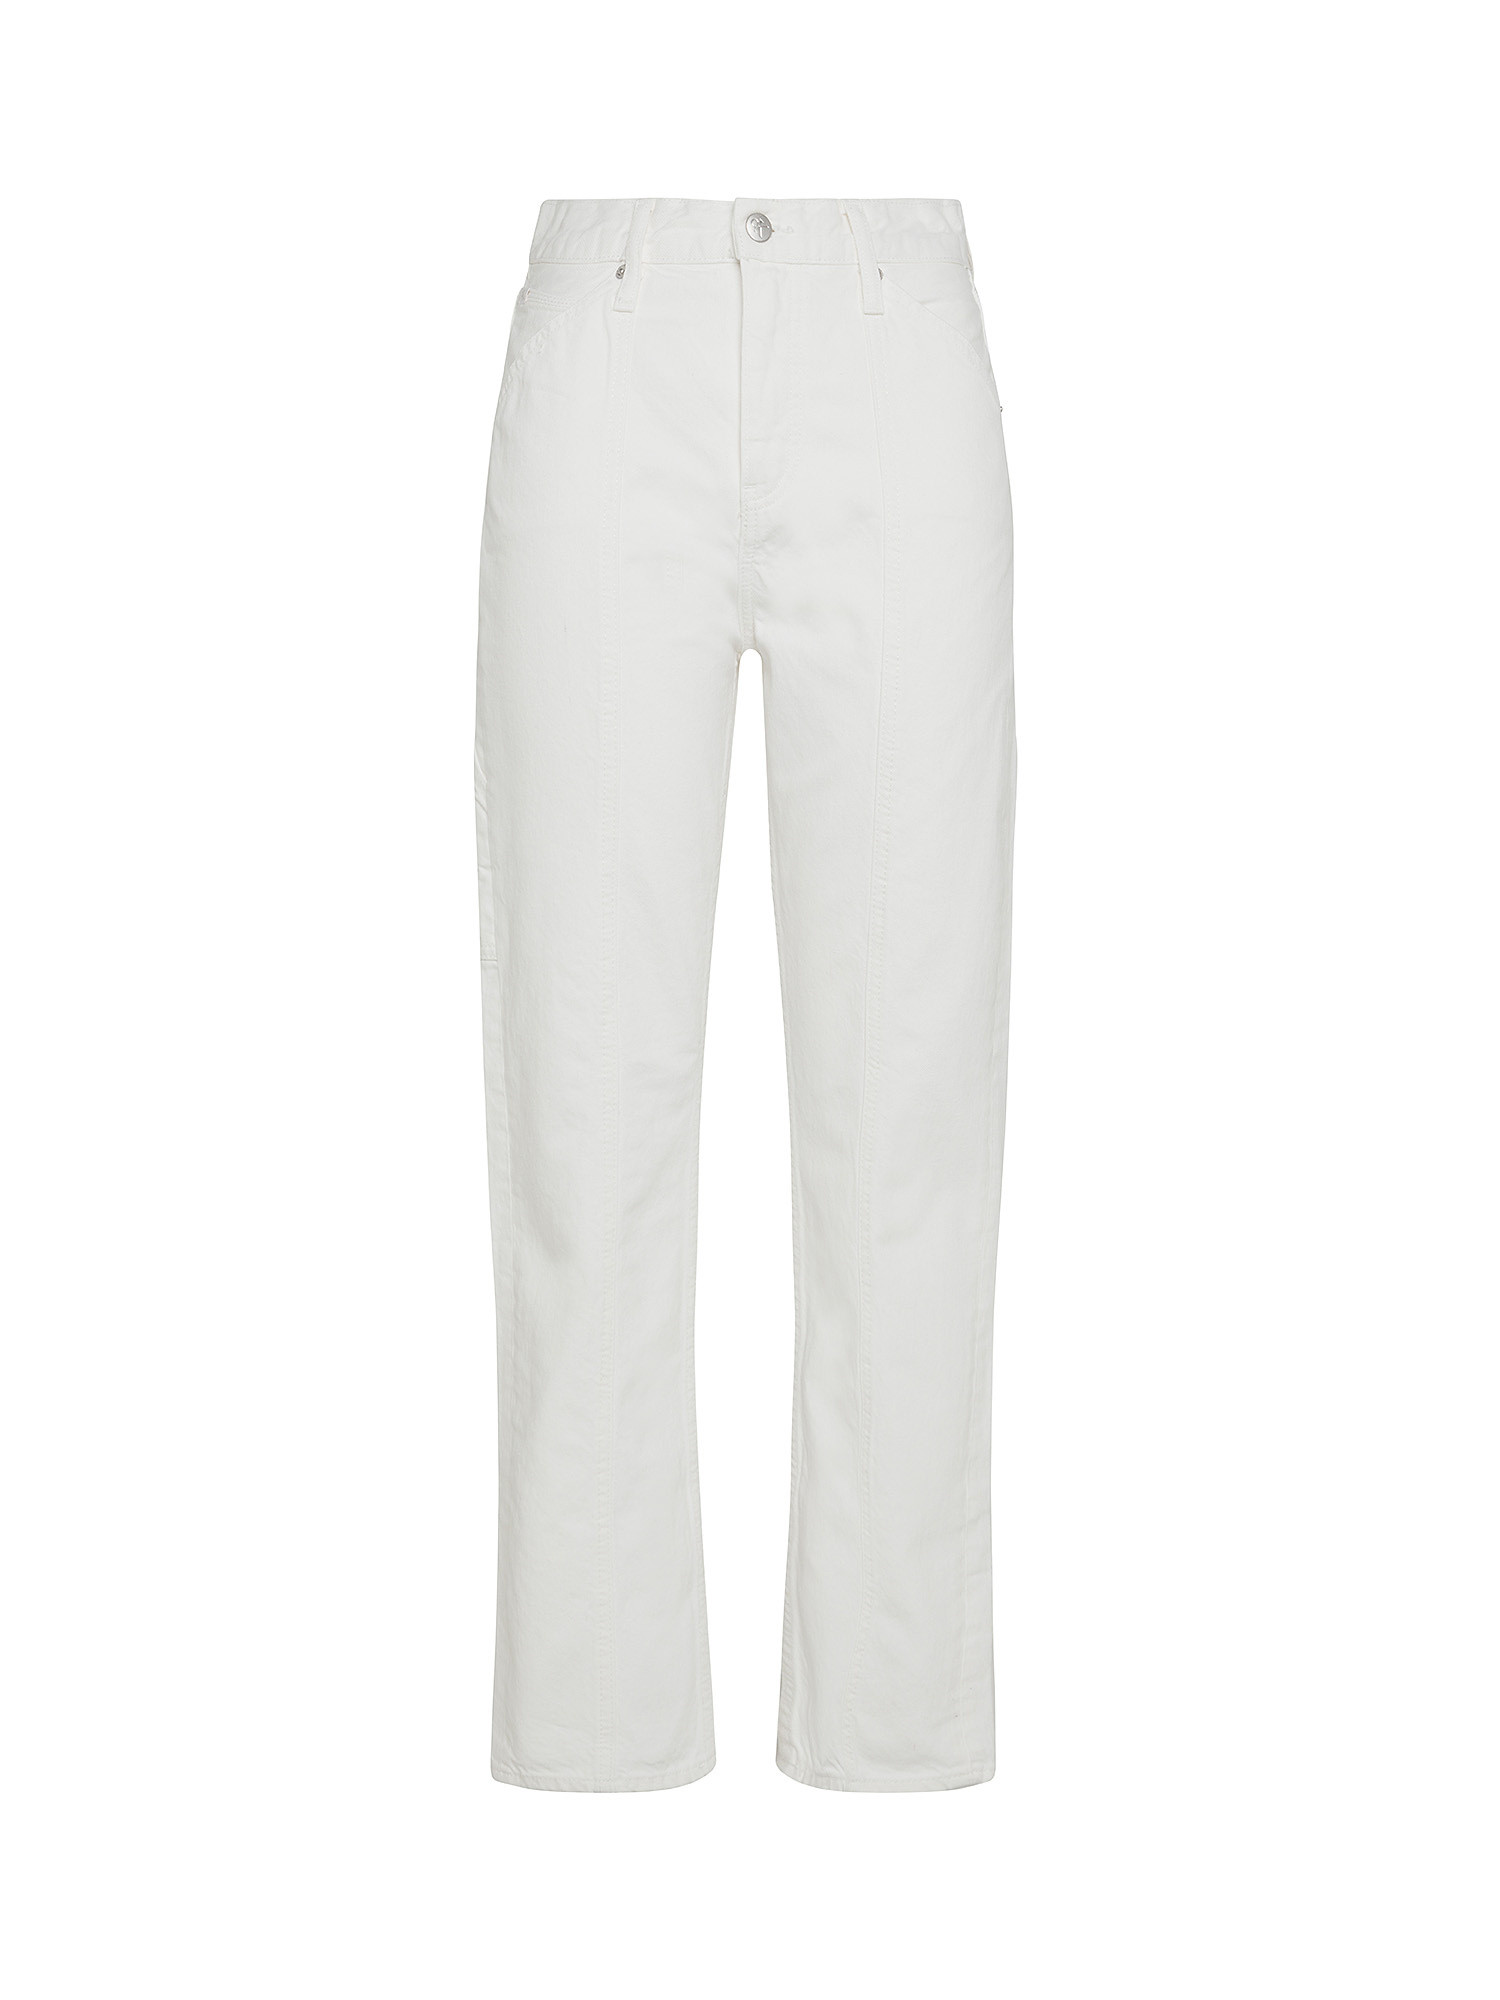 Calvin Klein Jeans - Straight cotton jeans, White, large image number 0